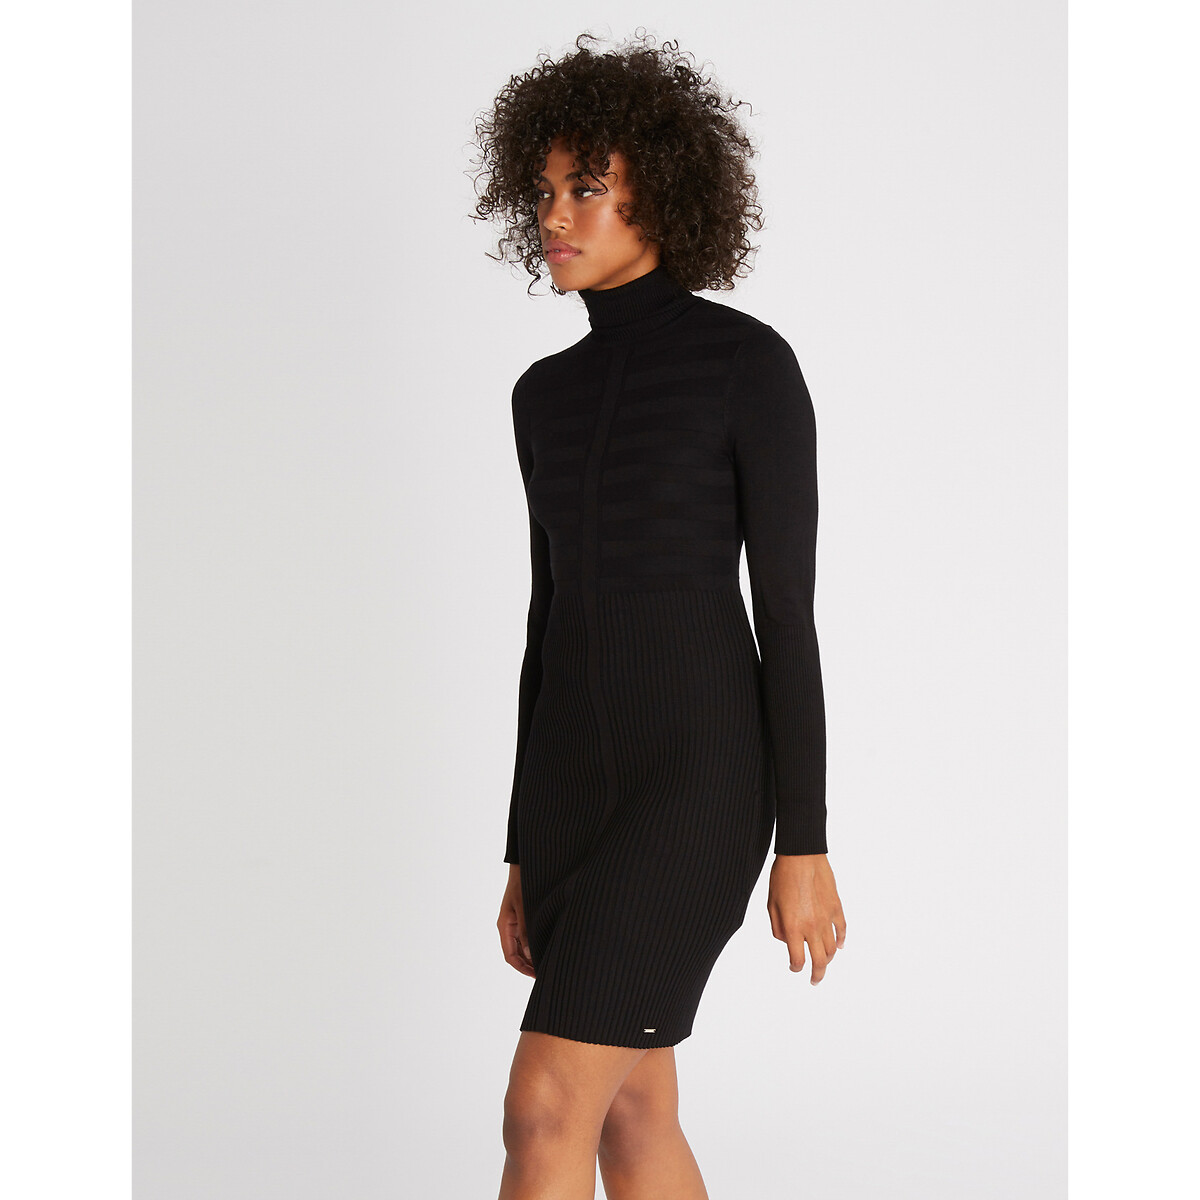 Ribbed Bodycon Dress with Turtleneck and Long Sleeves